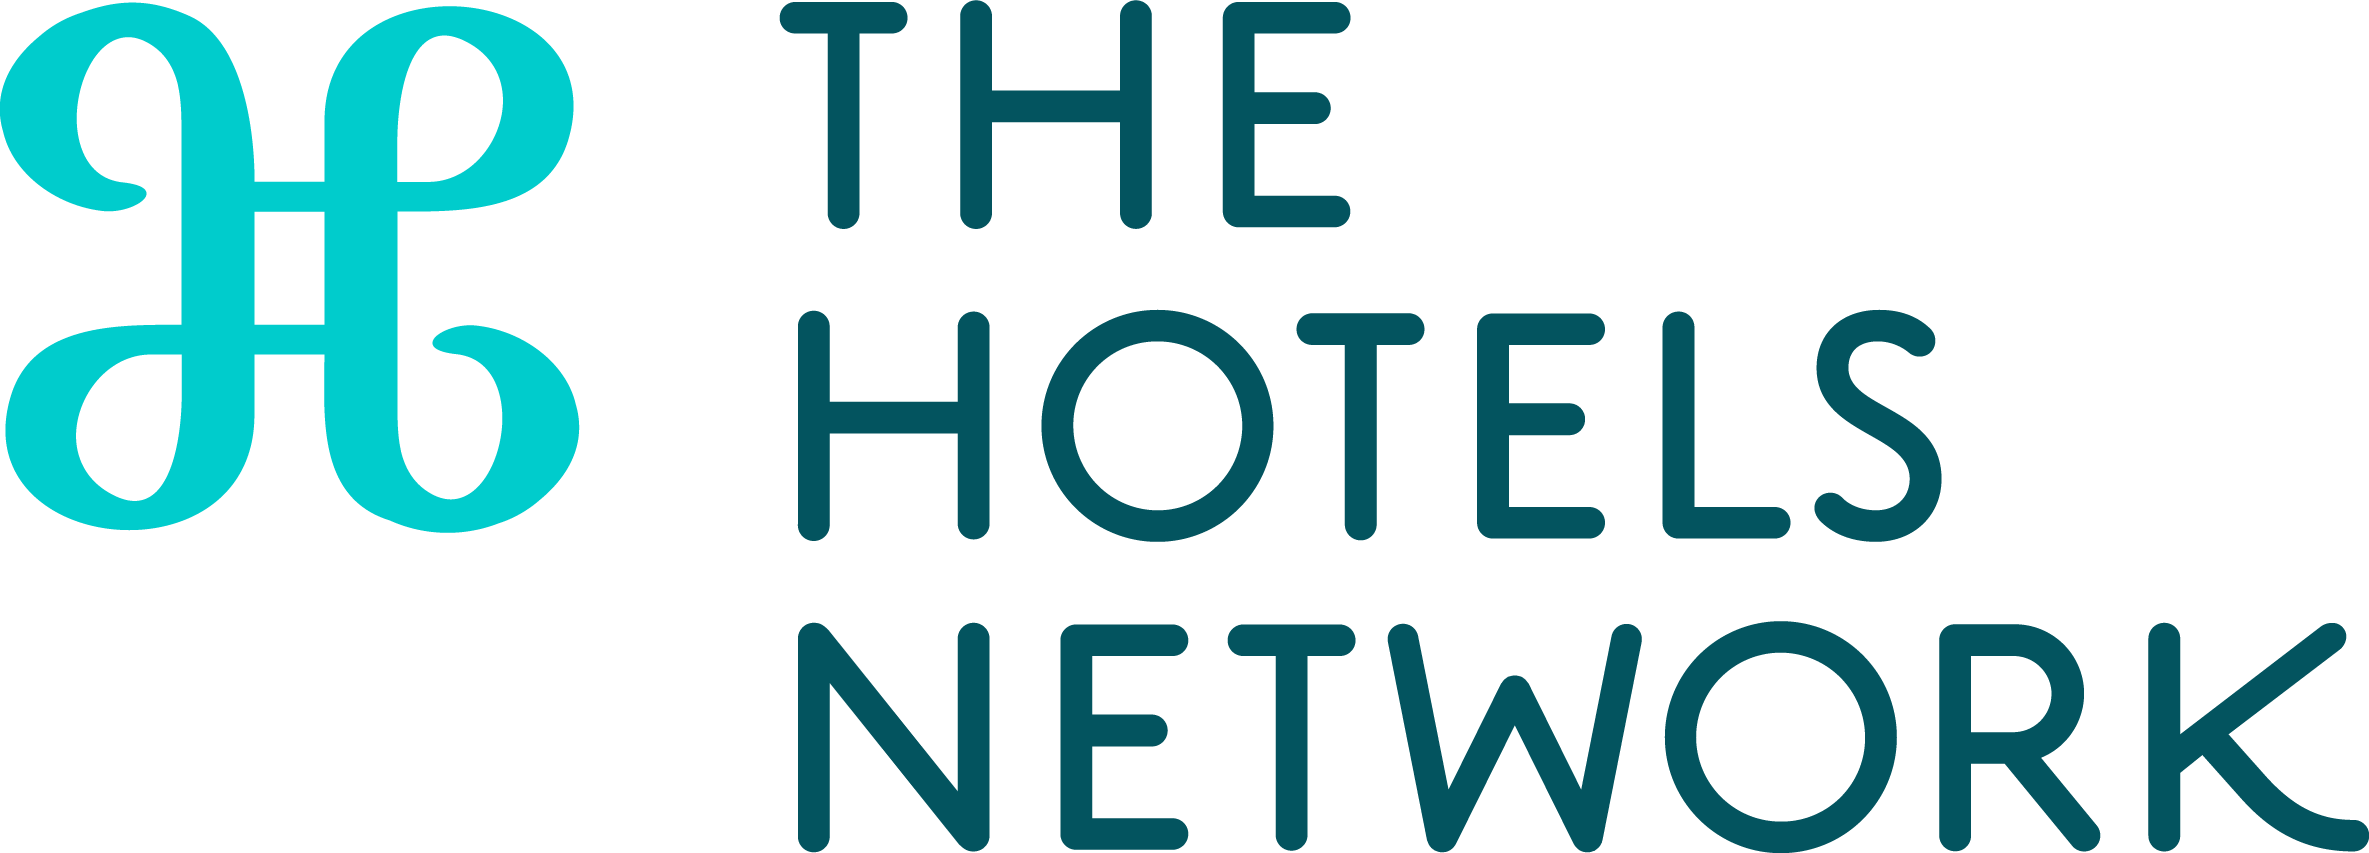 the hotels network logo